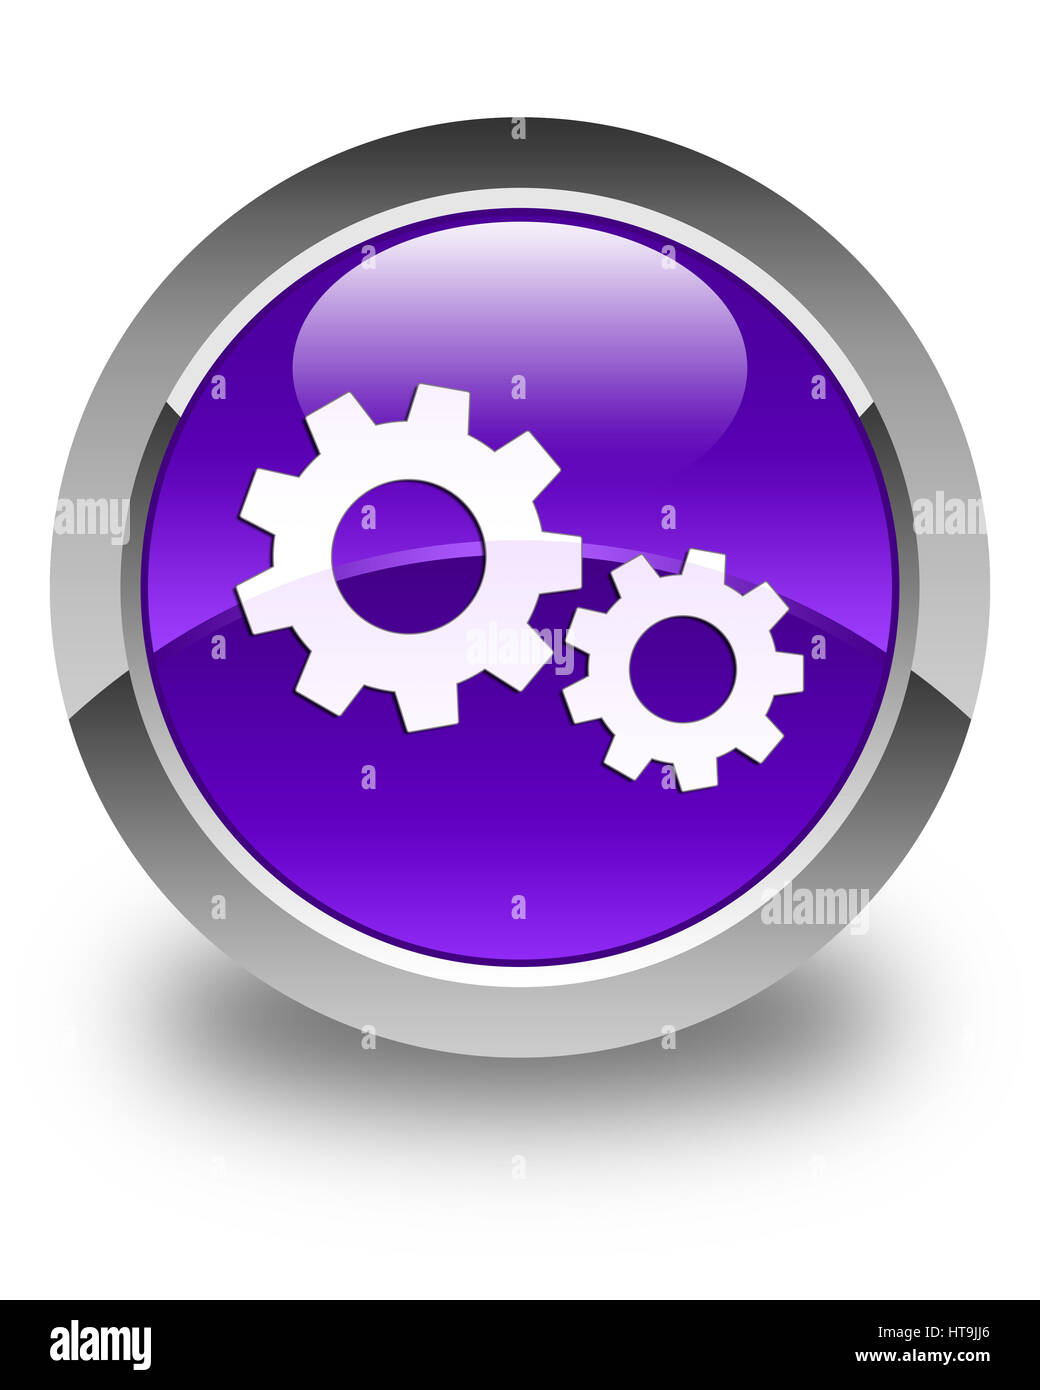 Process icon isolated on glossy purple round button abstract illustration Stock Photo